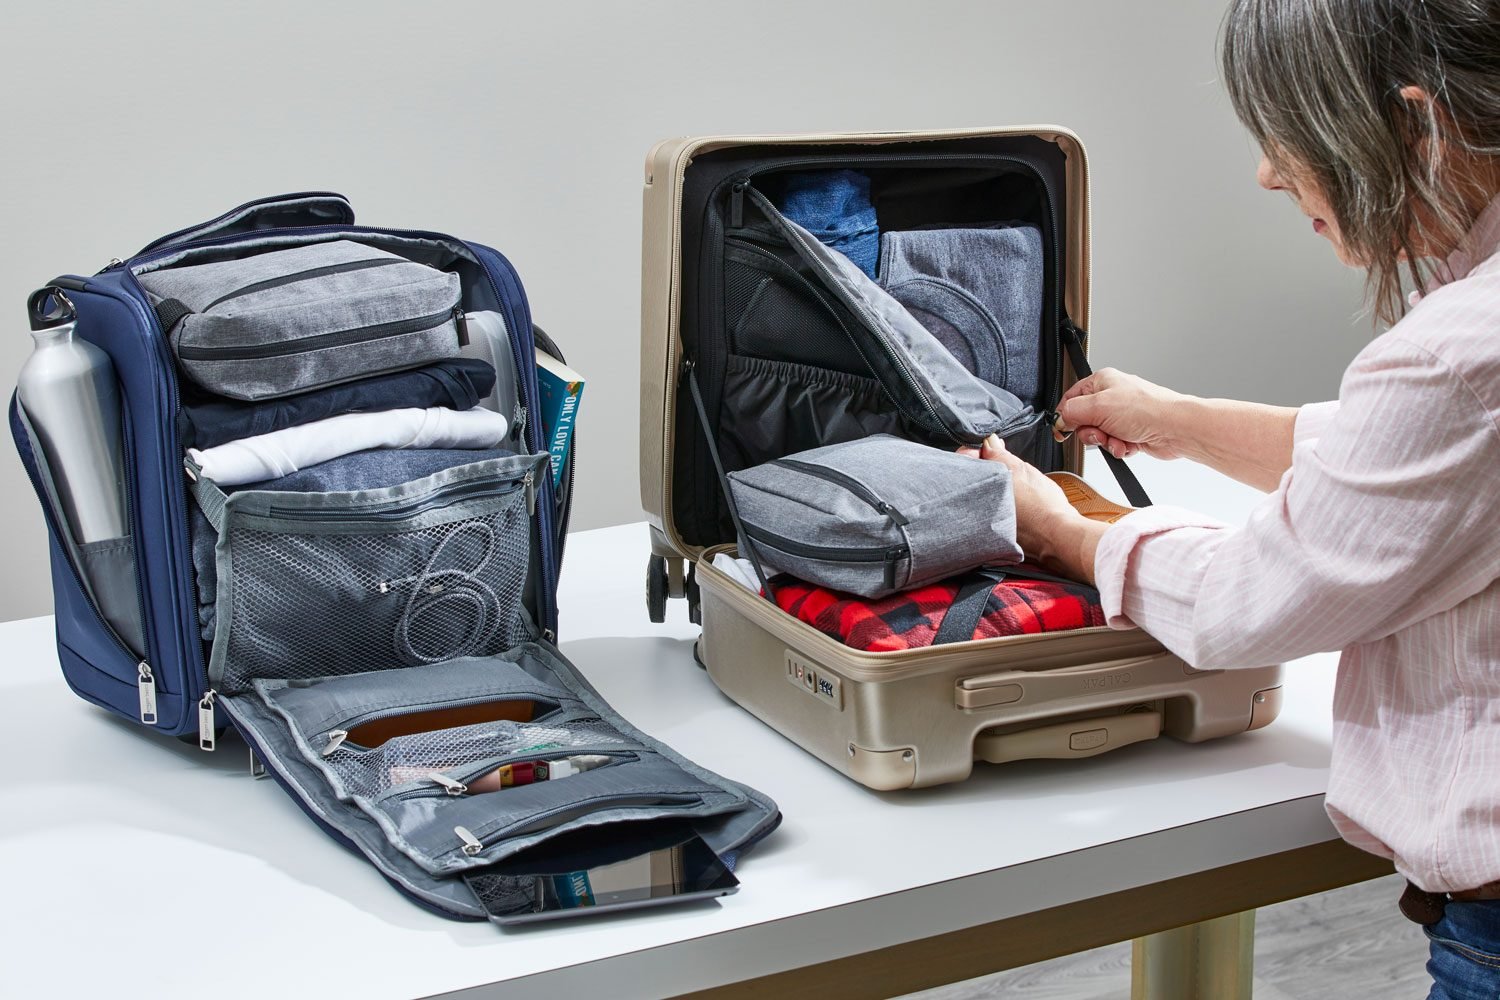 Testing luggage capacity in carry-on under-seat luggage